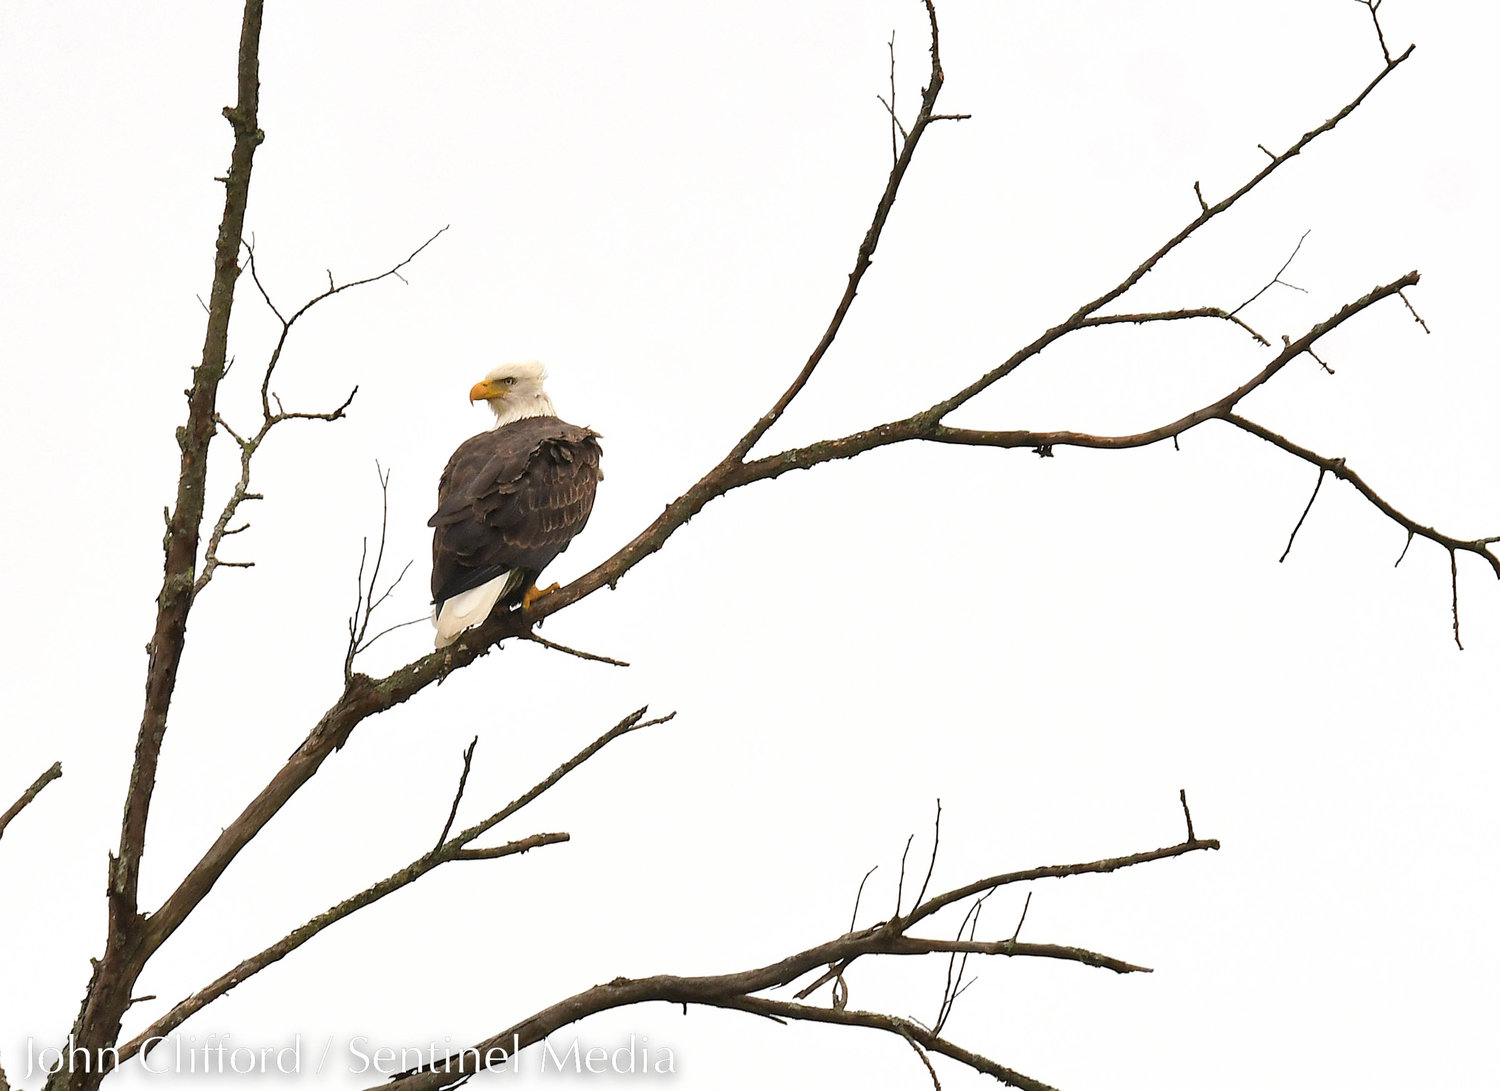 An American bald eagle on Route 294 across the street from Adirondack HS perched on a branch Friday afternoon October 7, 2022.